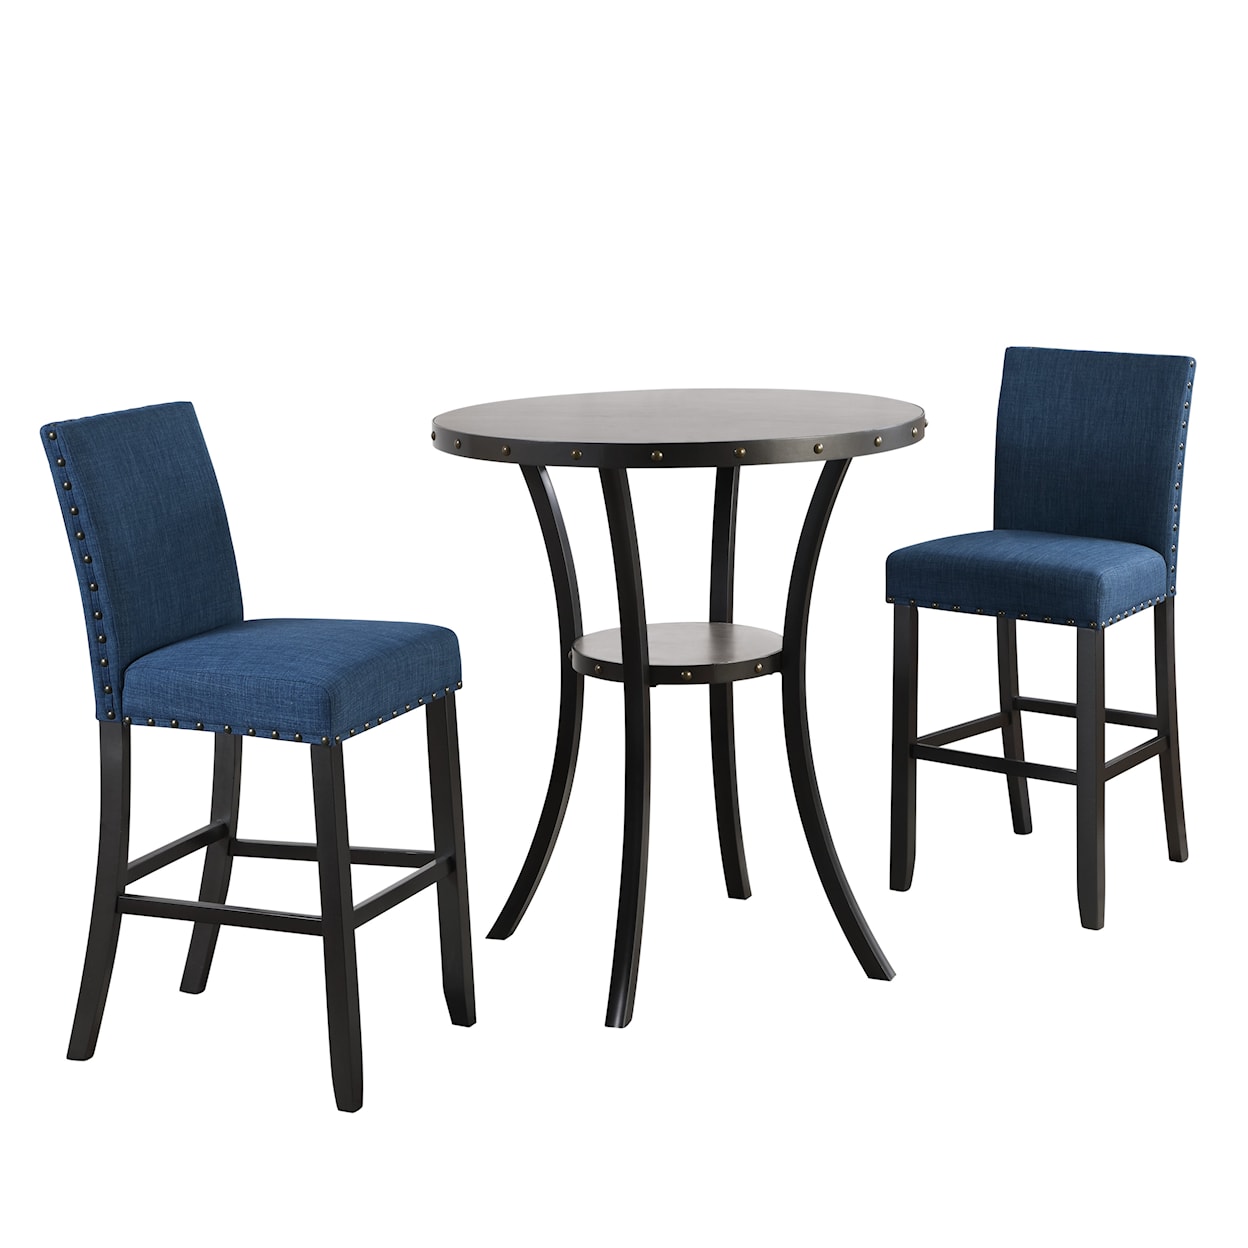 New Classic Crispin Bar Table and Stool Set